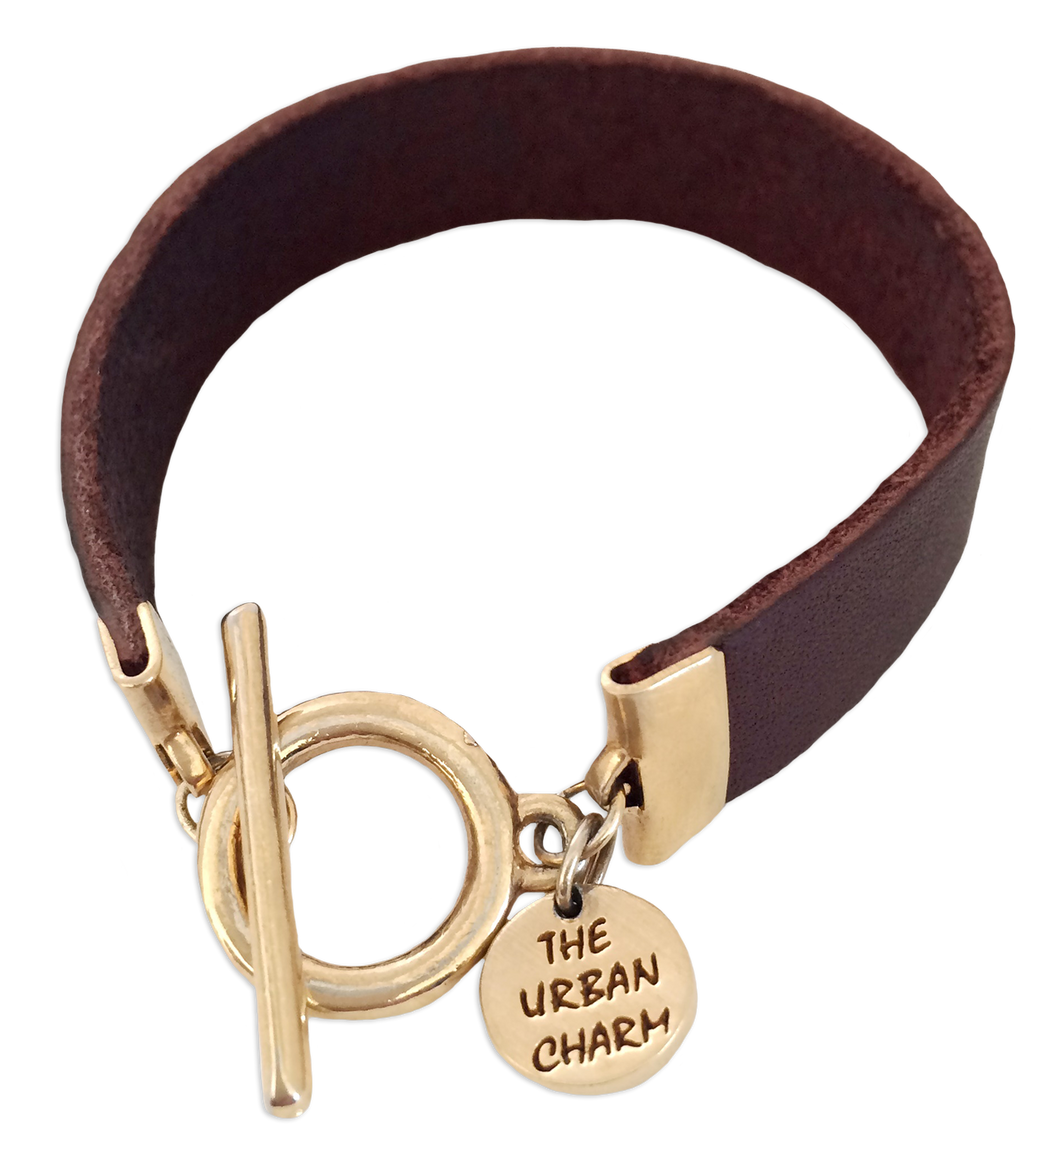 Burgundy Leather Color Band Bracelet by The Urban Charm